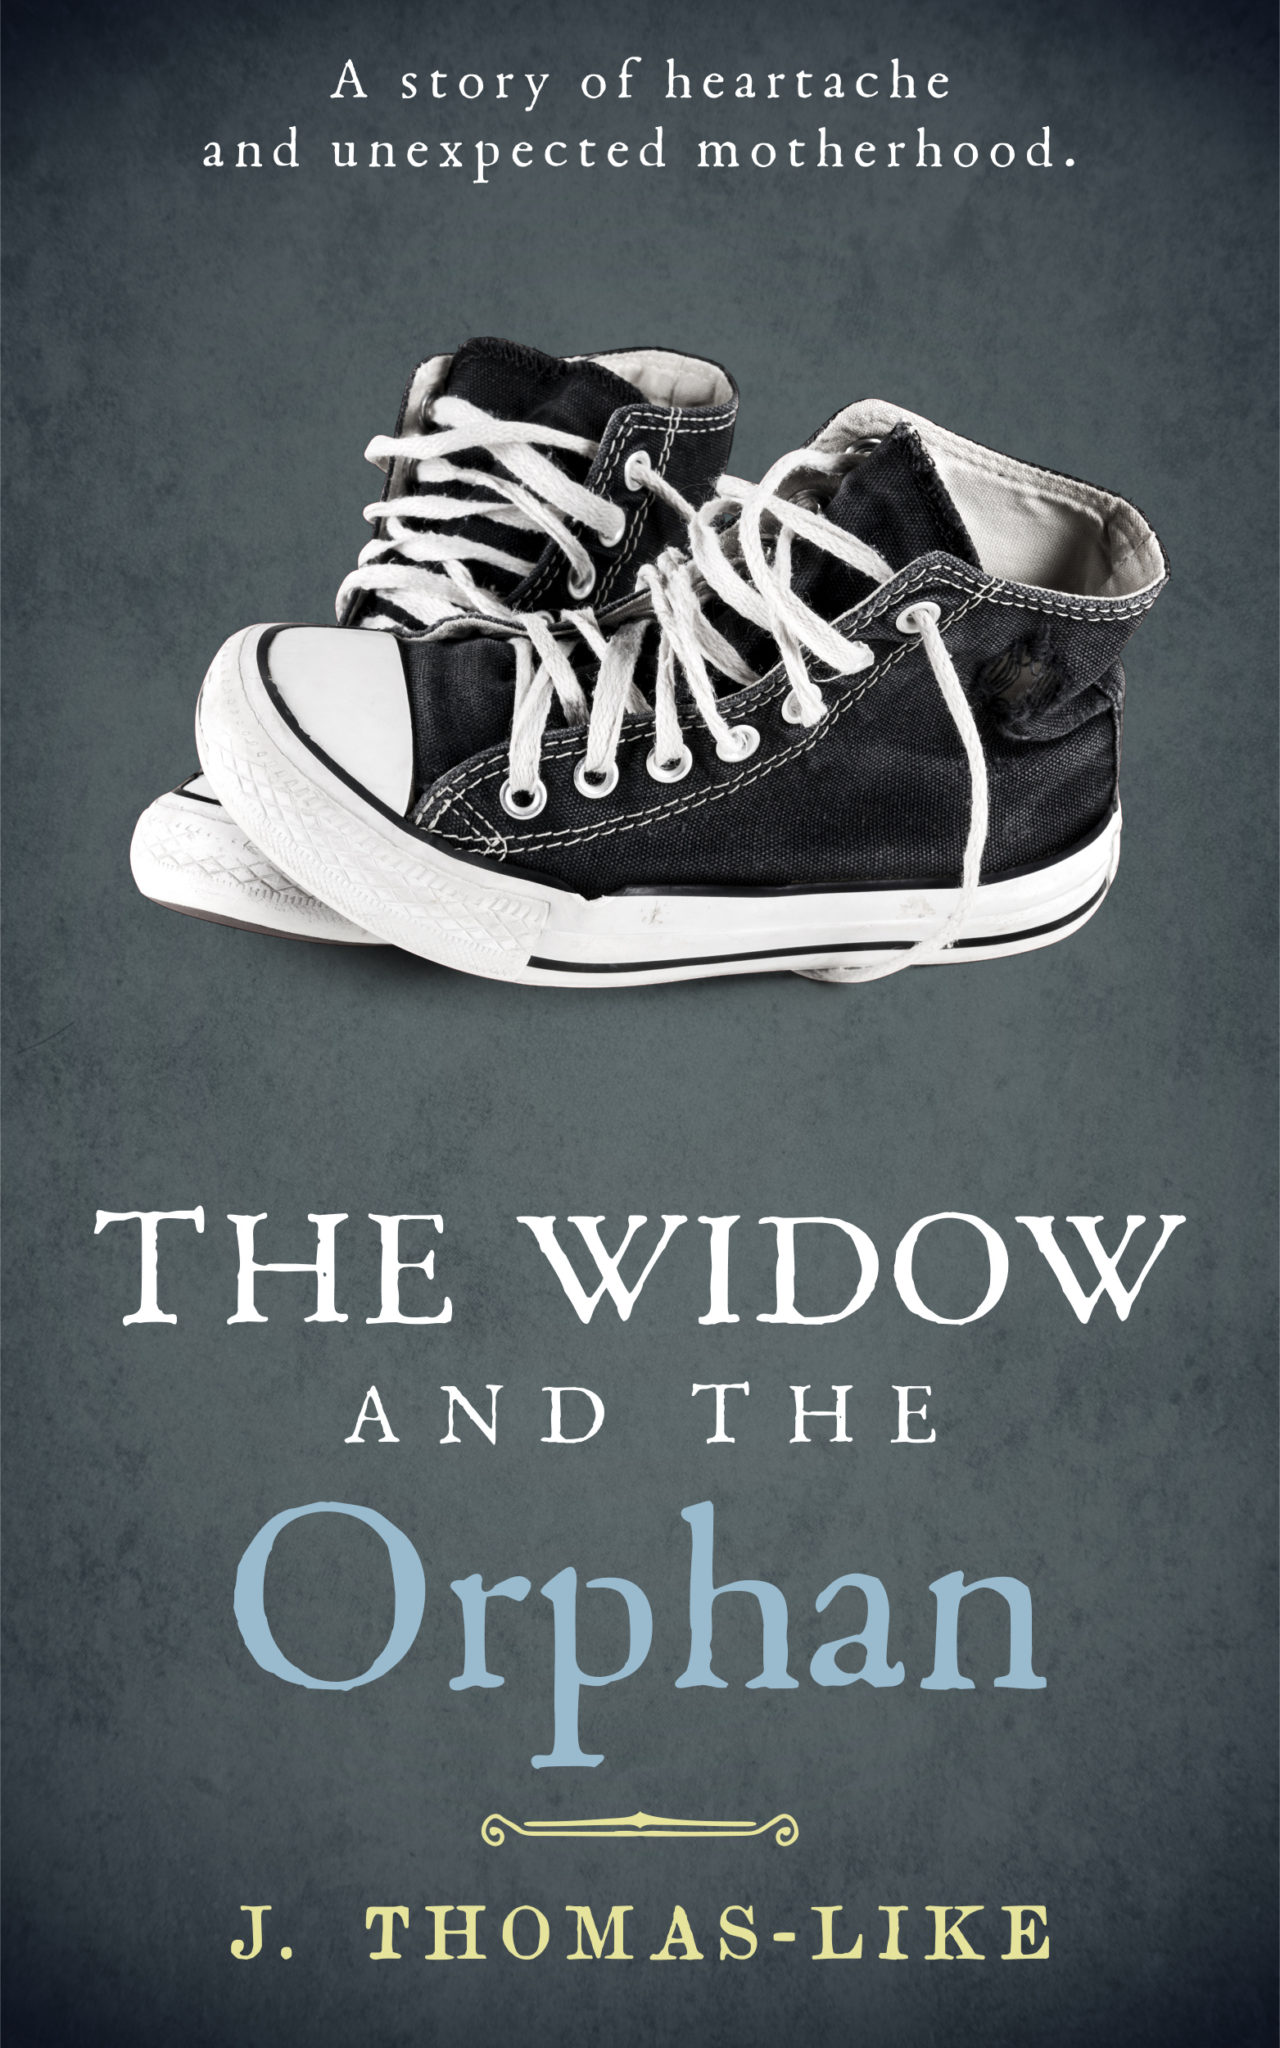 FREE: The Widow and the Orphan by J. Thomas-Like